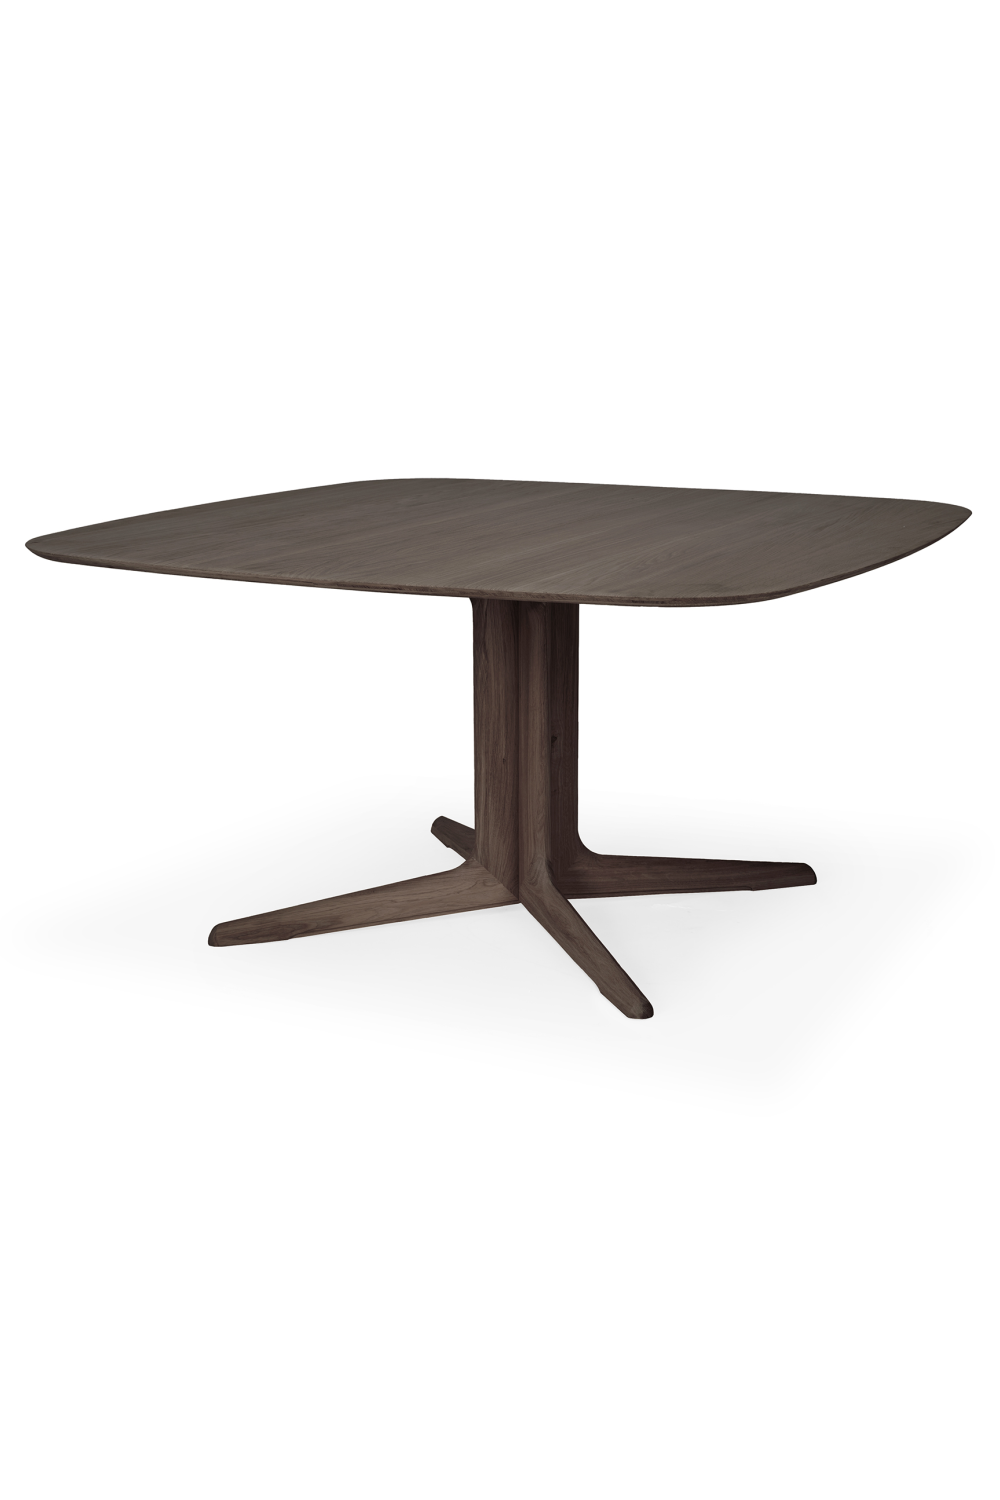 Central-Footed Varnished Oak Dining Table | Ethnicraft Corto | Oroa.com